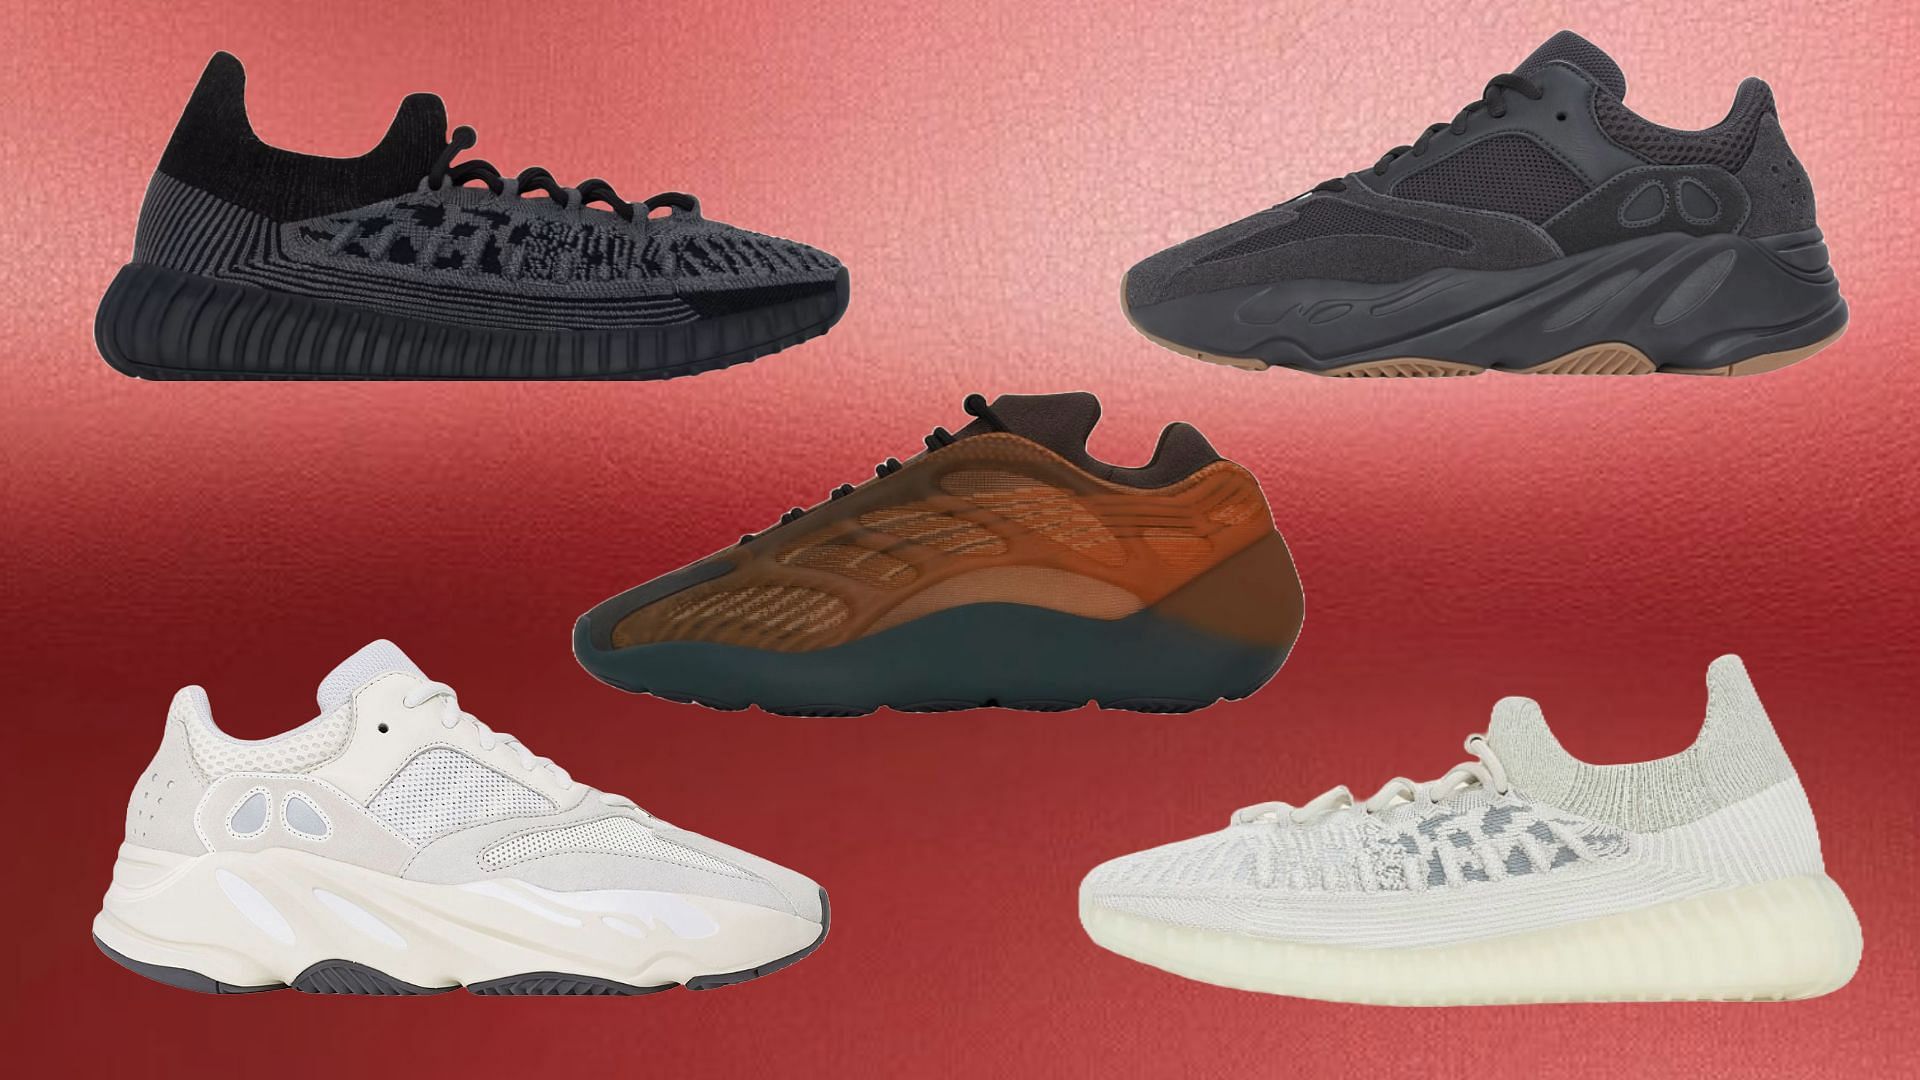 The 5 cheapest Adidas Yeezy sneakers to look out for in 2023 (Image via Adidas)